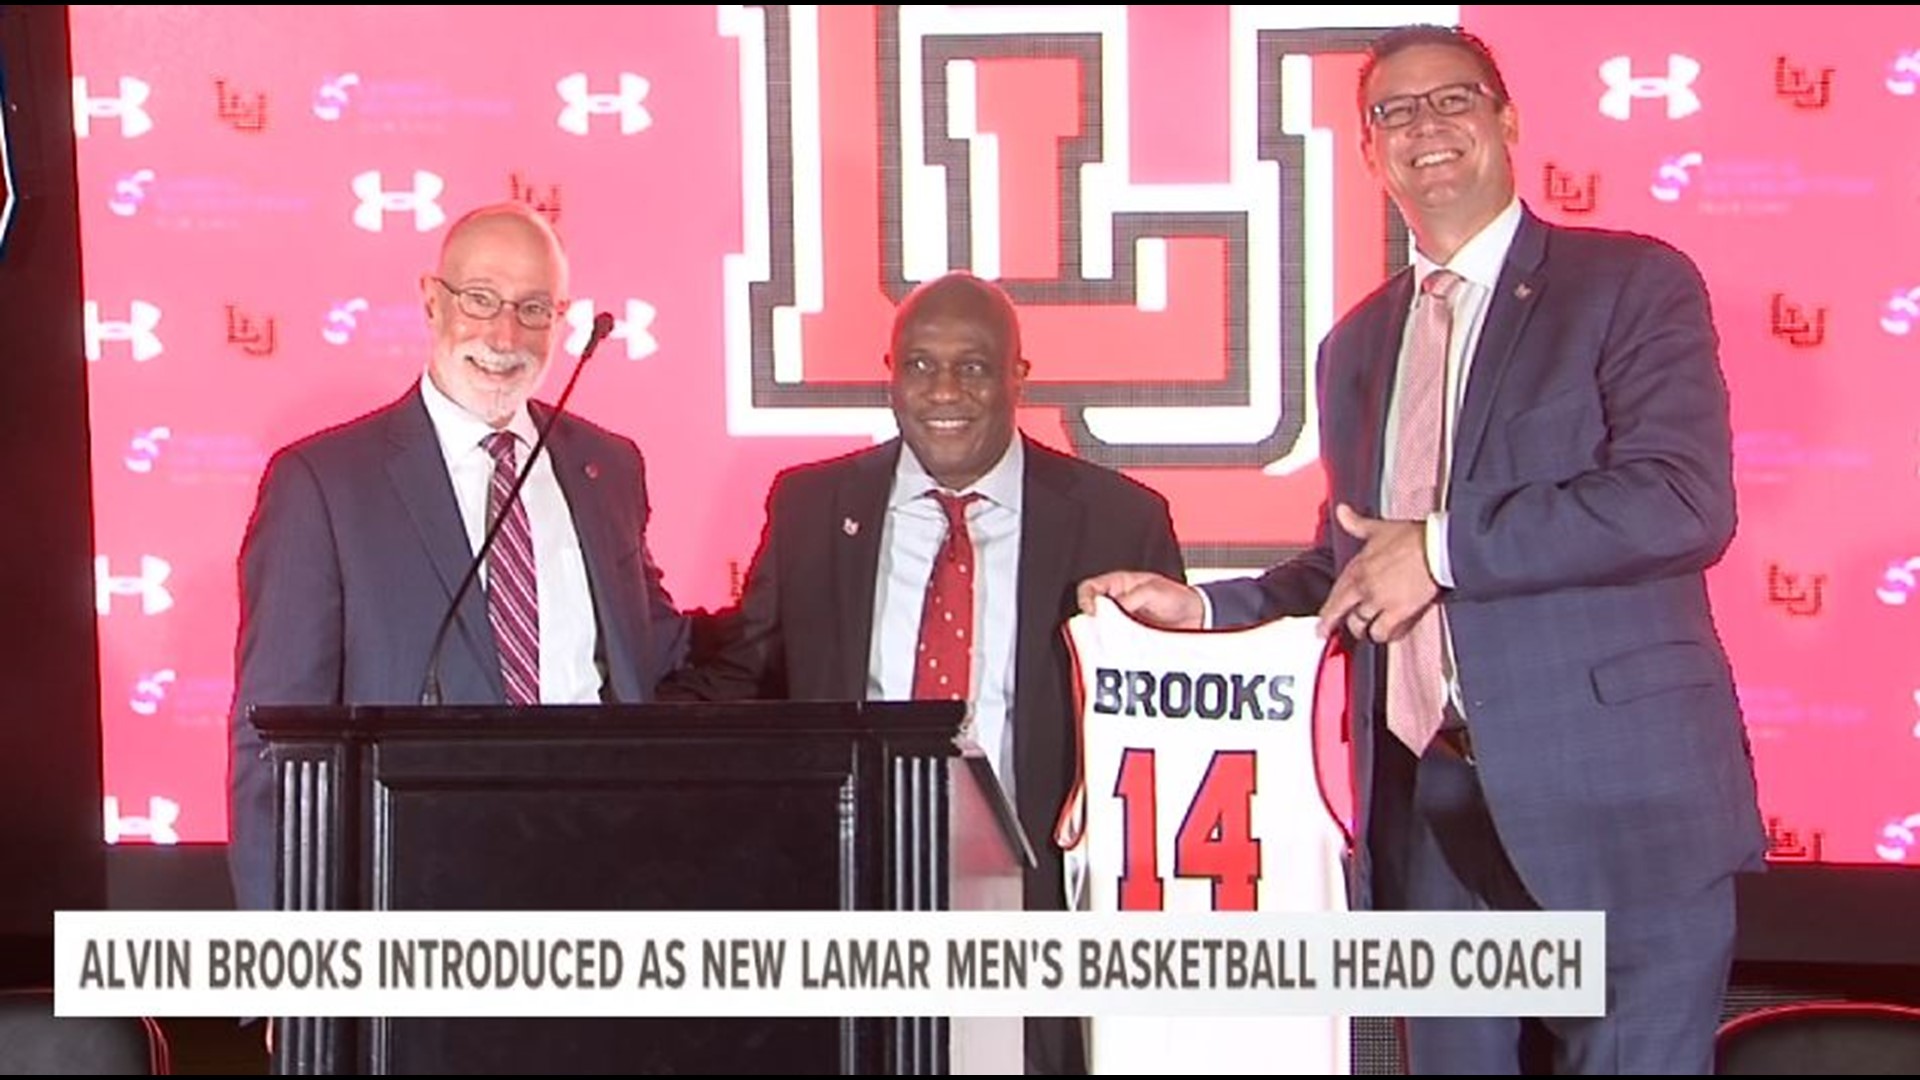 An LU alum, and one of the all-time greats in program history, Brooks returns to his alma mater after spending the previous 11 years at the University of Houston